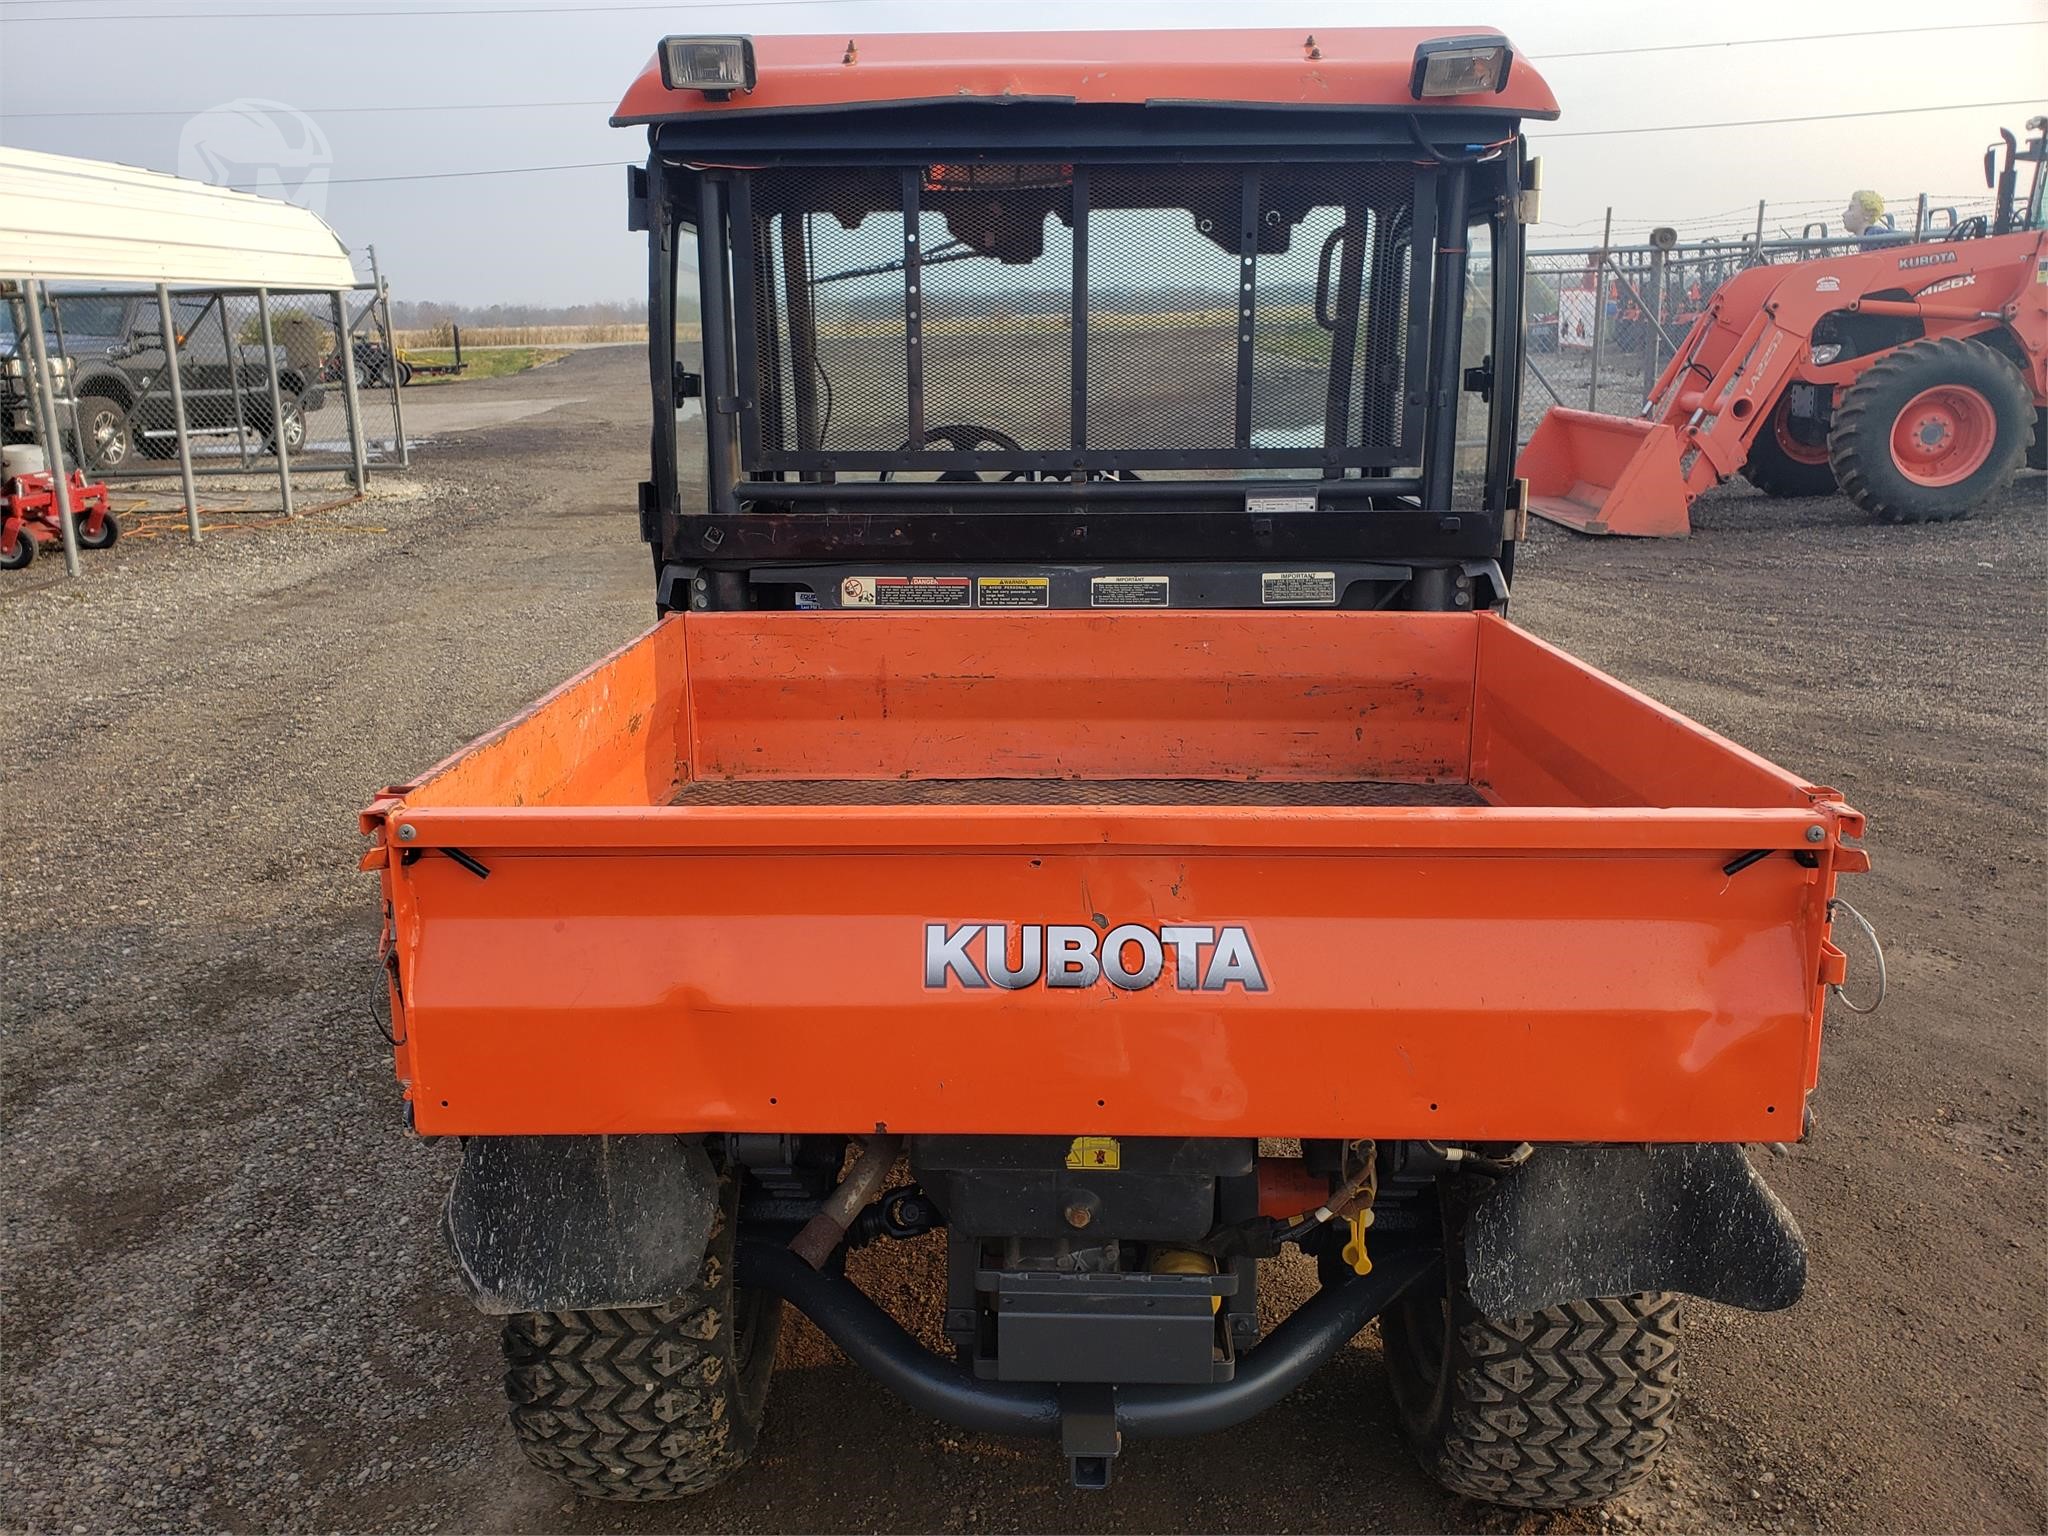 KUBOTA RTV900 Auction Results in Mount Sterling, Ohio